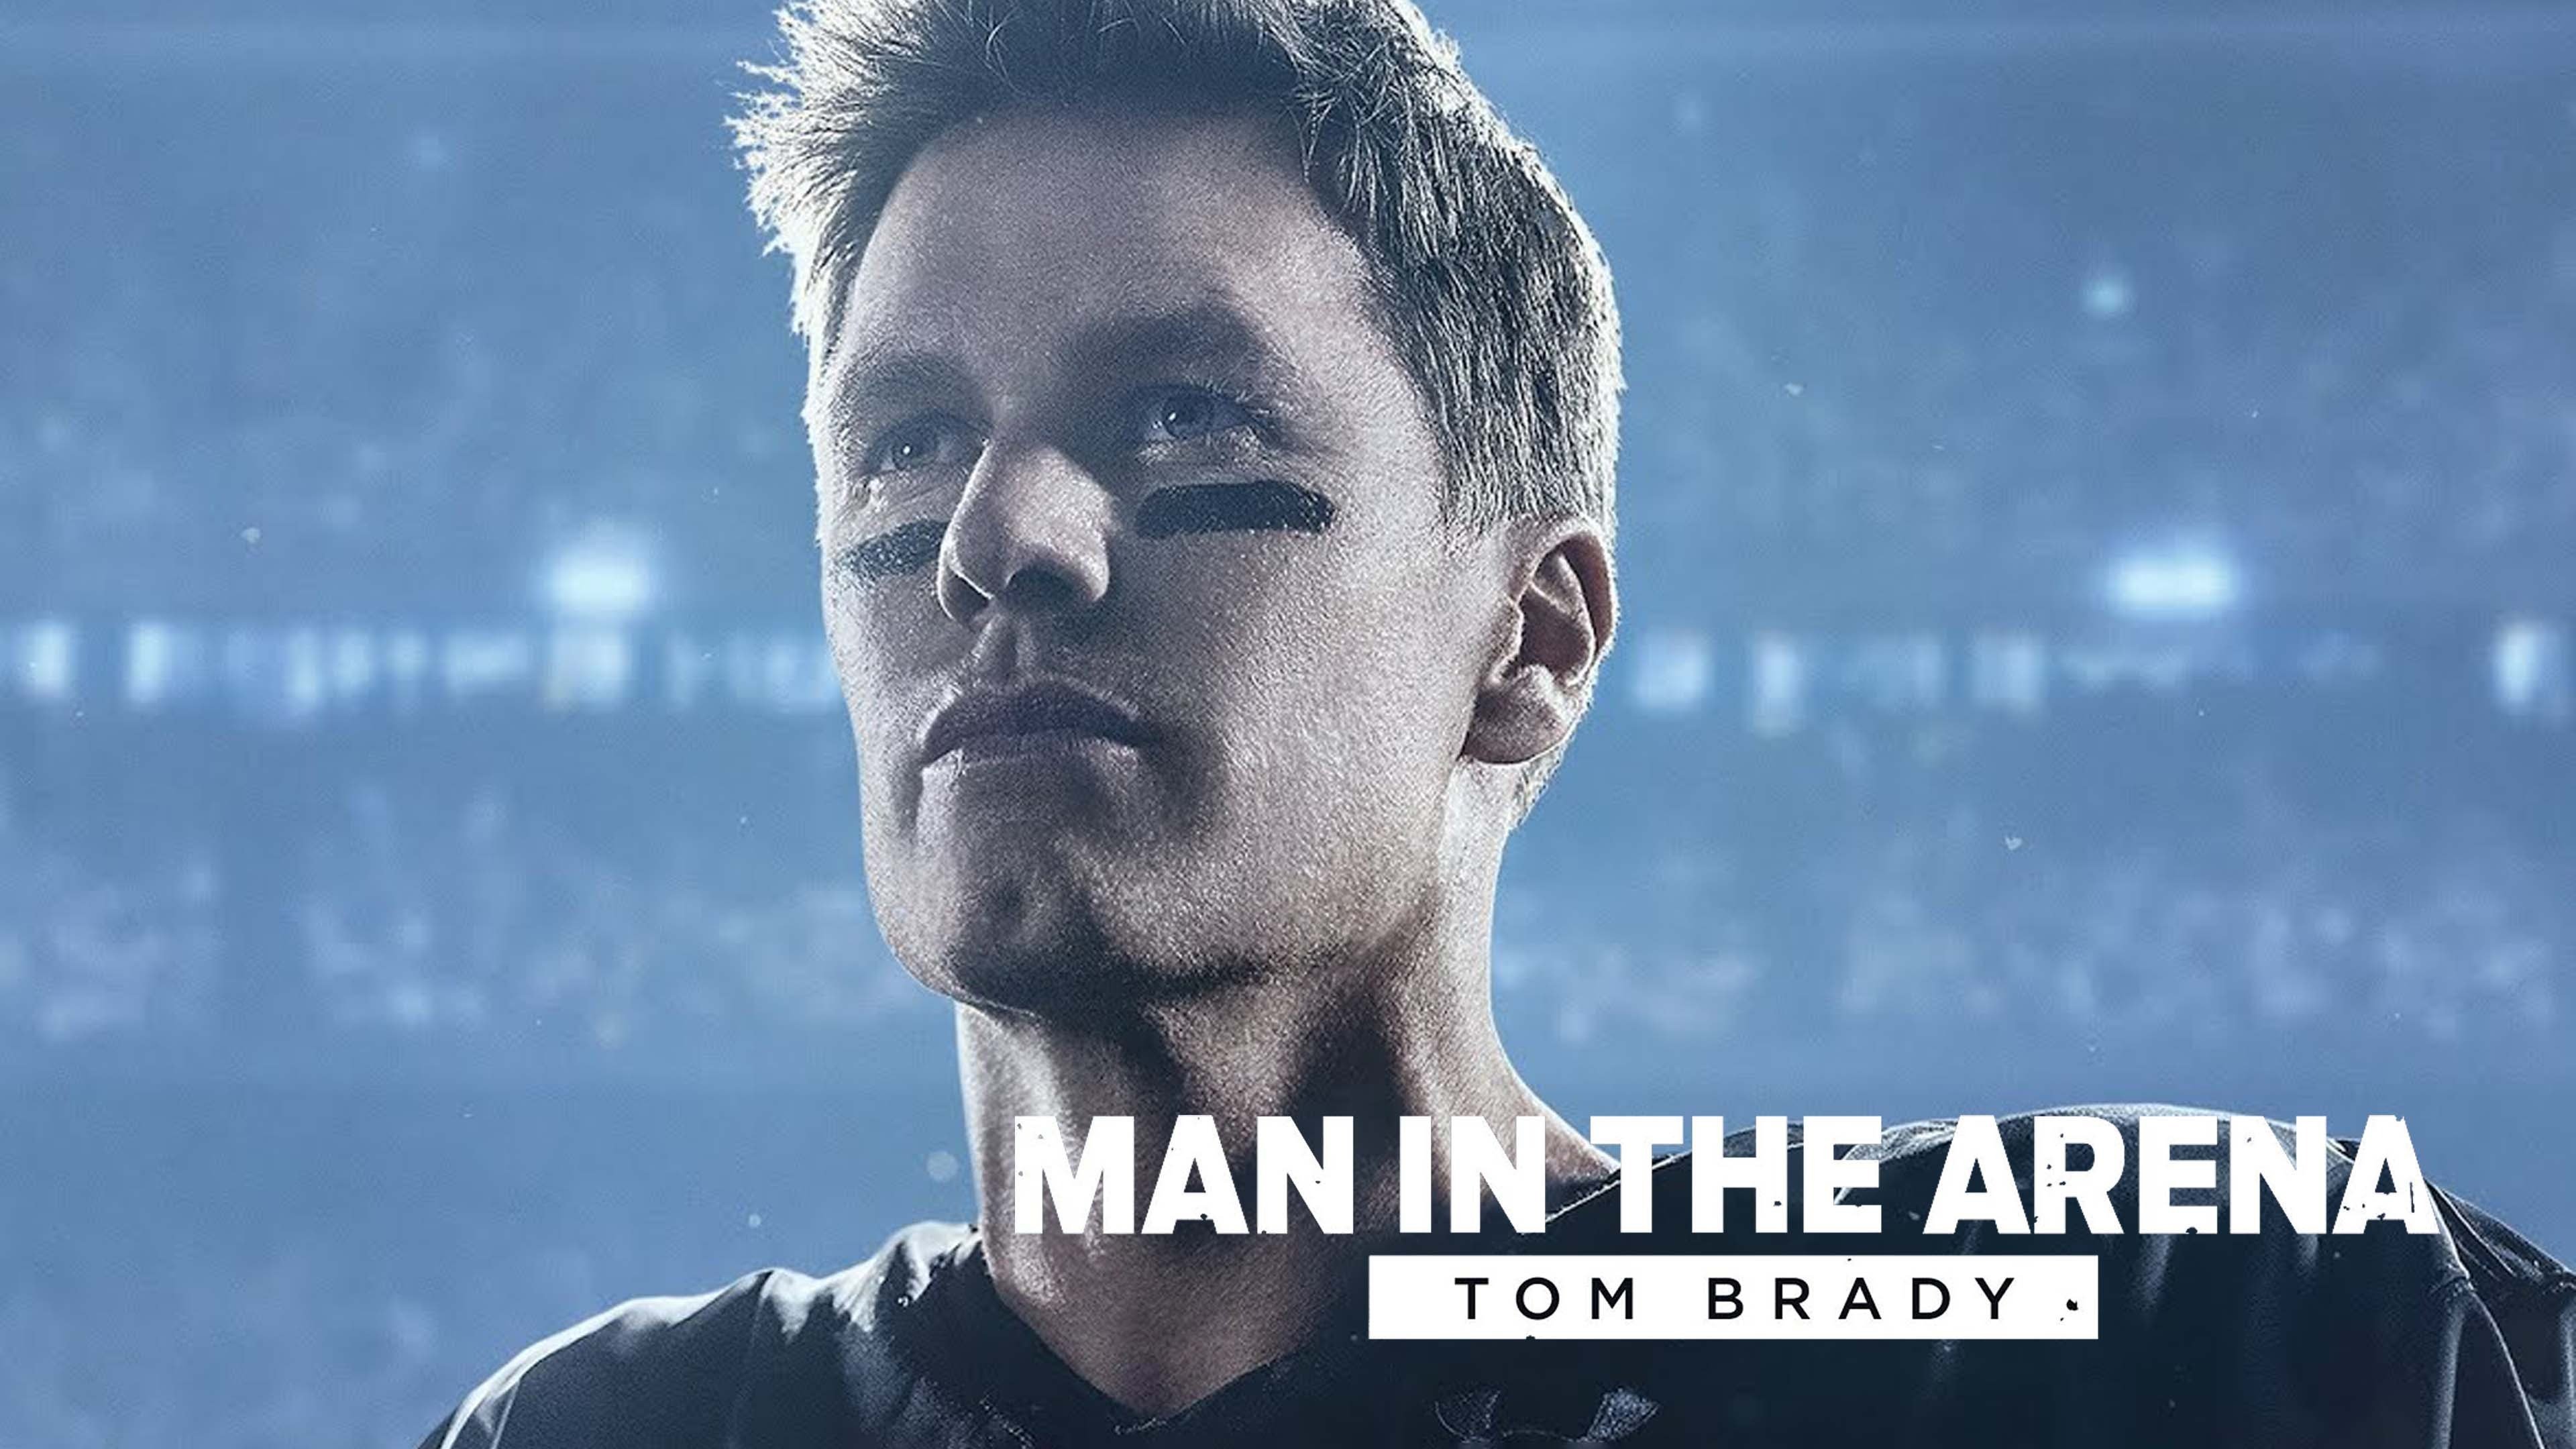 Man in the Arena: Tom Brady, Official Trailer